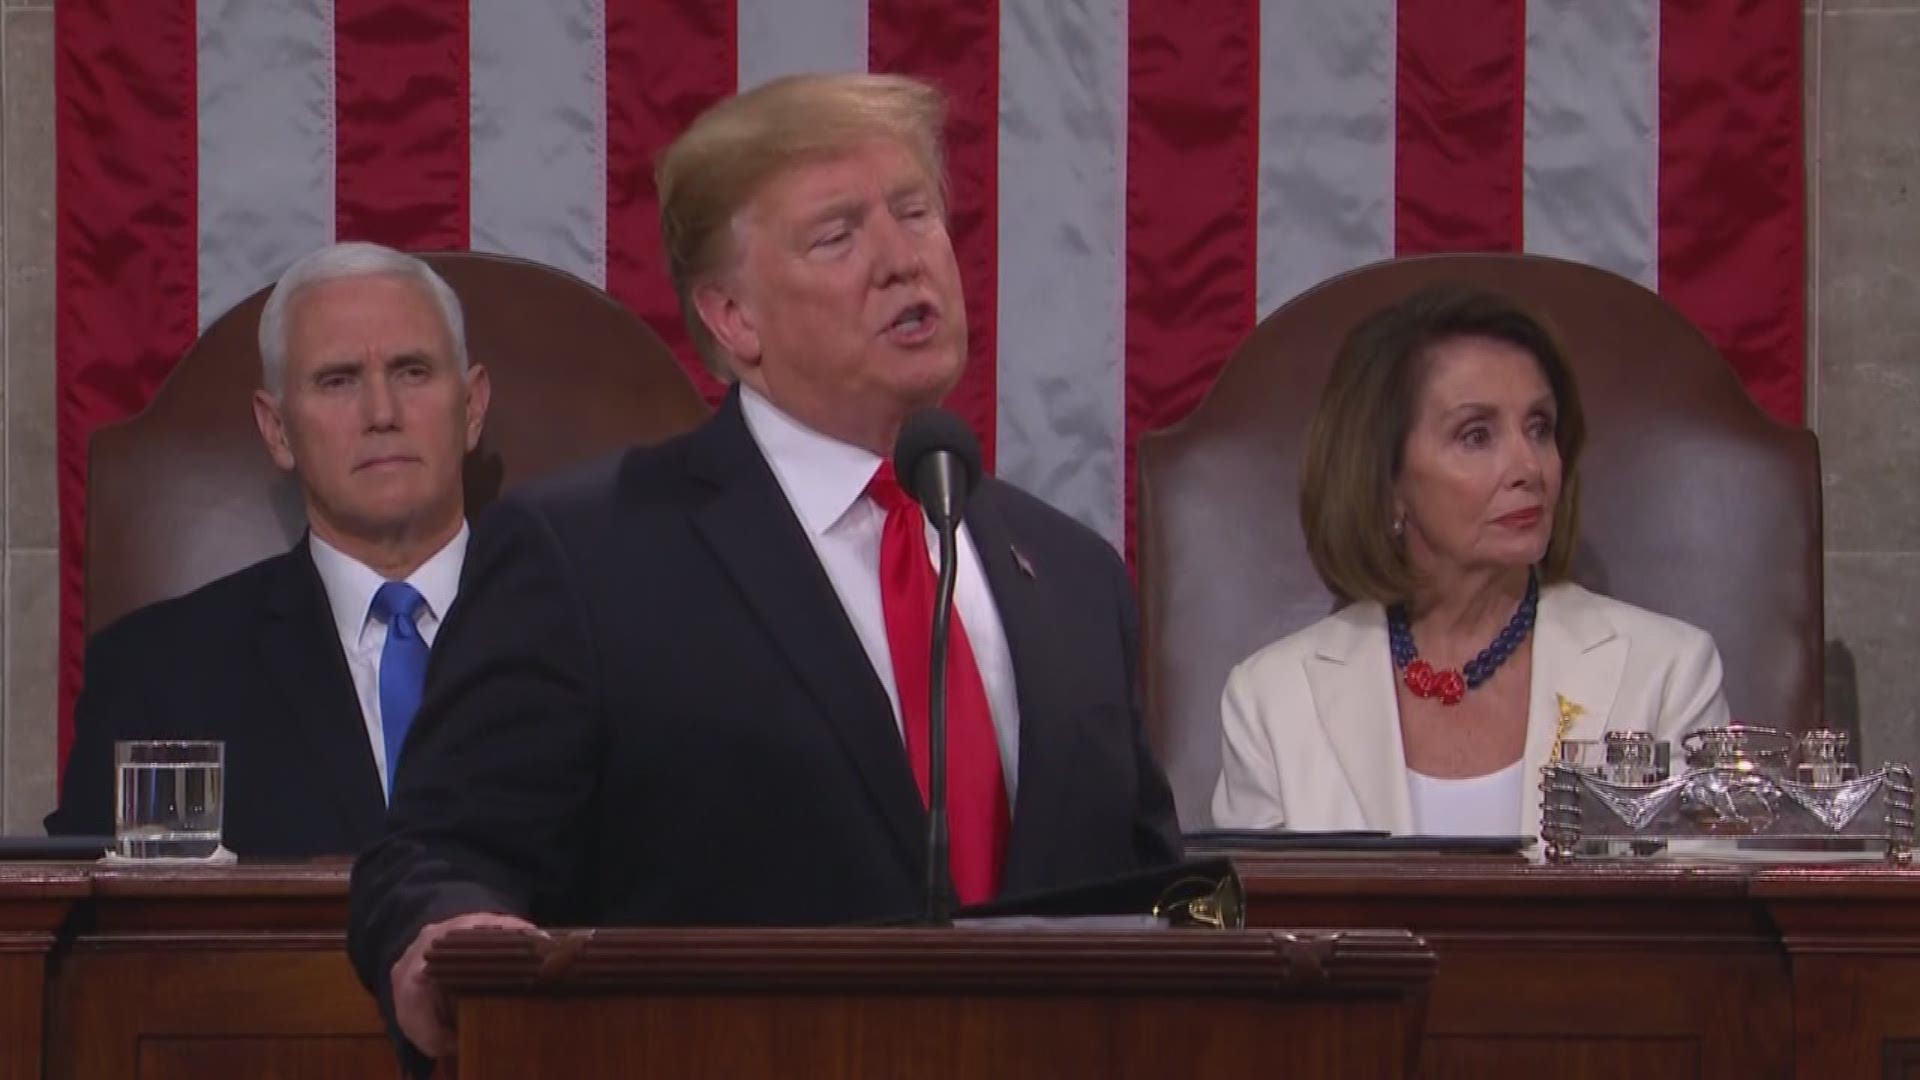 Boos were heard from members of Congress as Trump made his case for funding a wall along the southern border during his State of the Union speech.